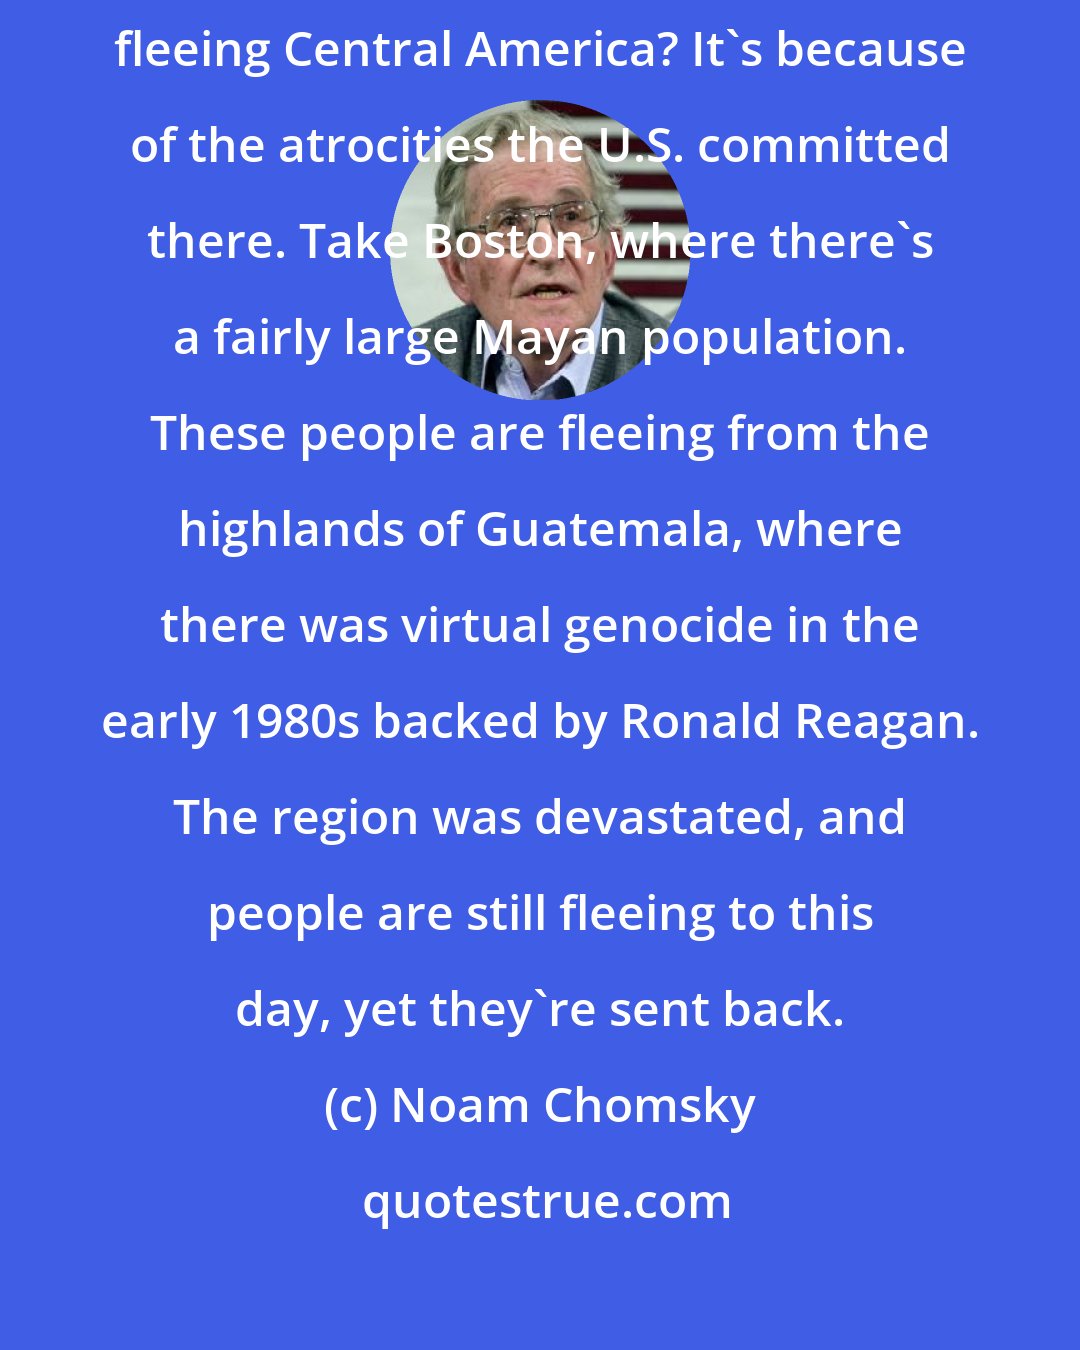 Noam Chomsky: The most dramatic case is that of the Central Americans. Why are people fleeing Central America? It's because of the atrocities the U.S. committed there. Take Boston, where there's a fairly large Mayan population. These people are fleeing from the highlands of Guatemala, where there was virtual genocide in the early 1980s backed by Ronald Reagan. The region was devastated, and people are still fleeing to this day, yet they're sent back.